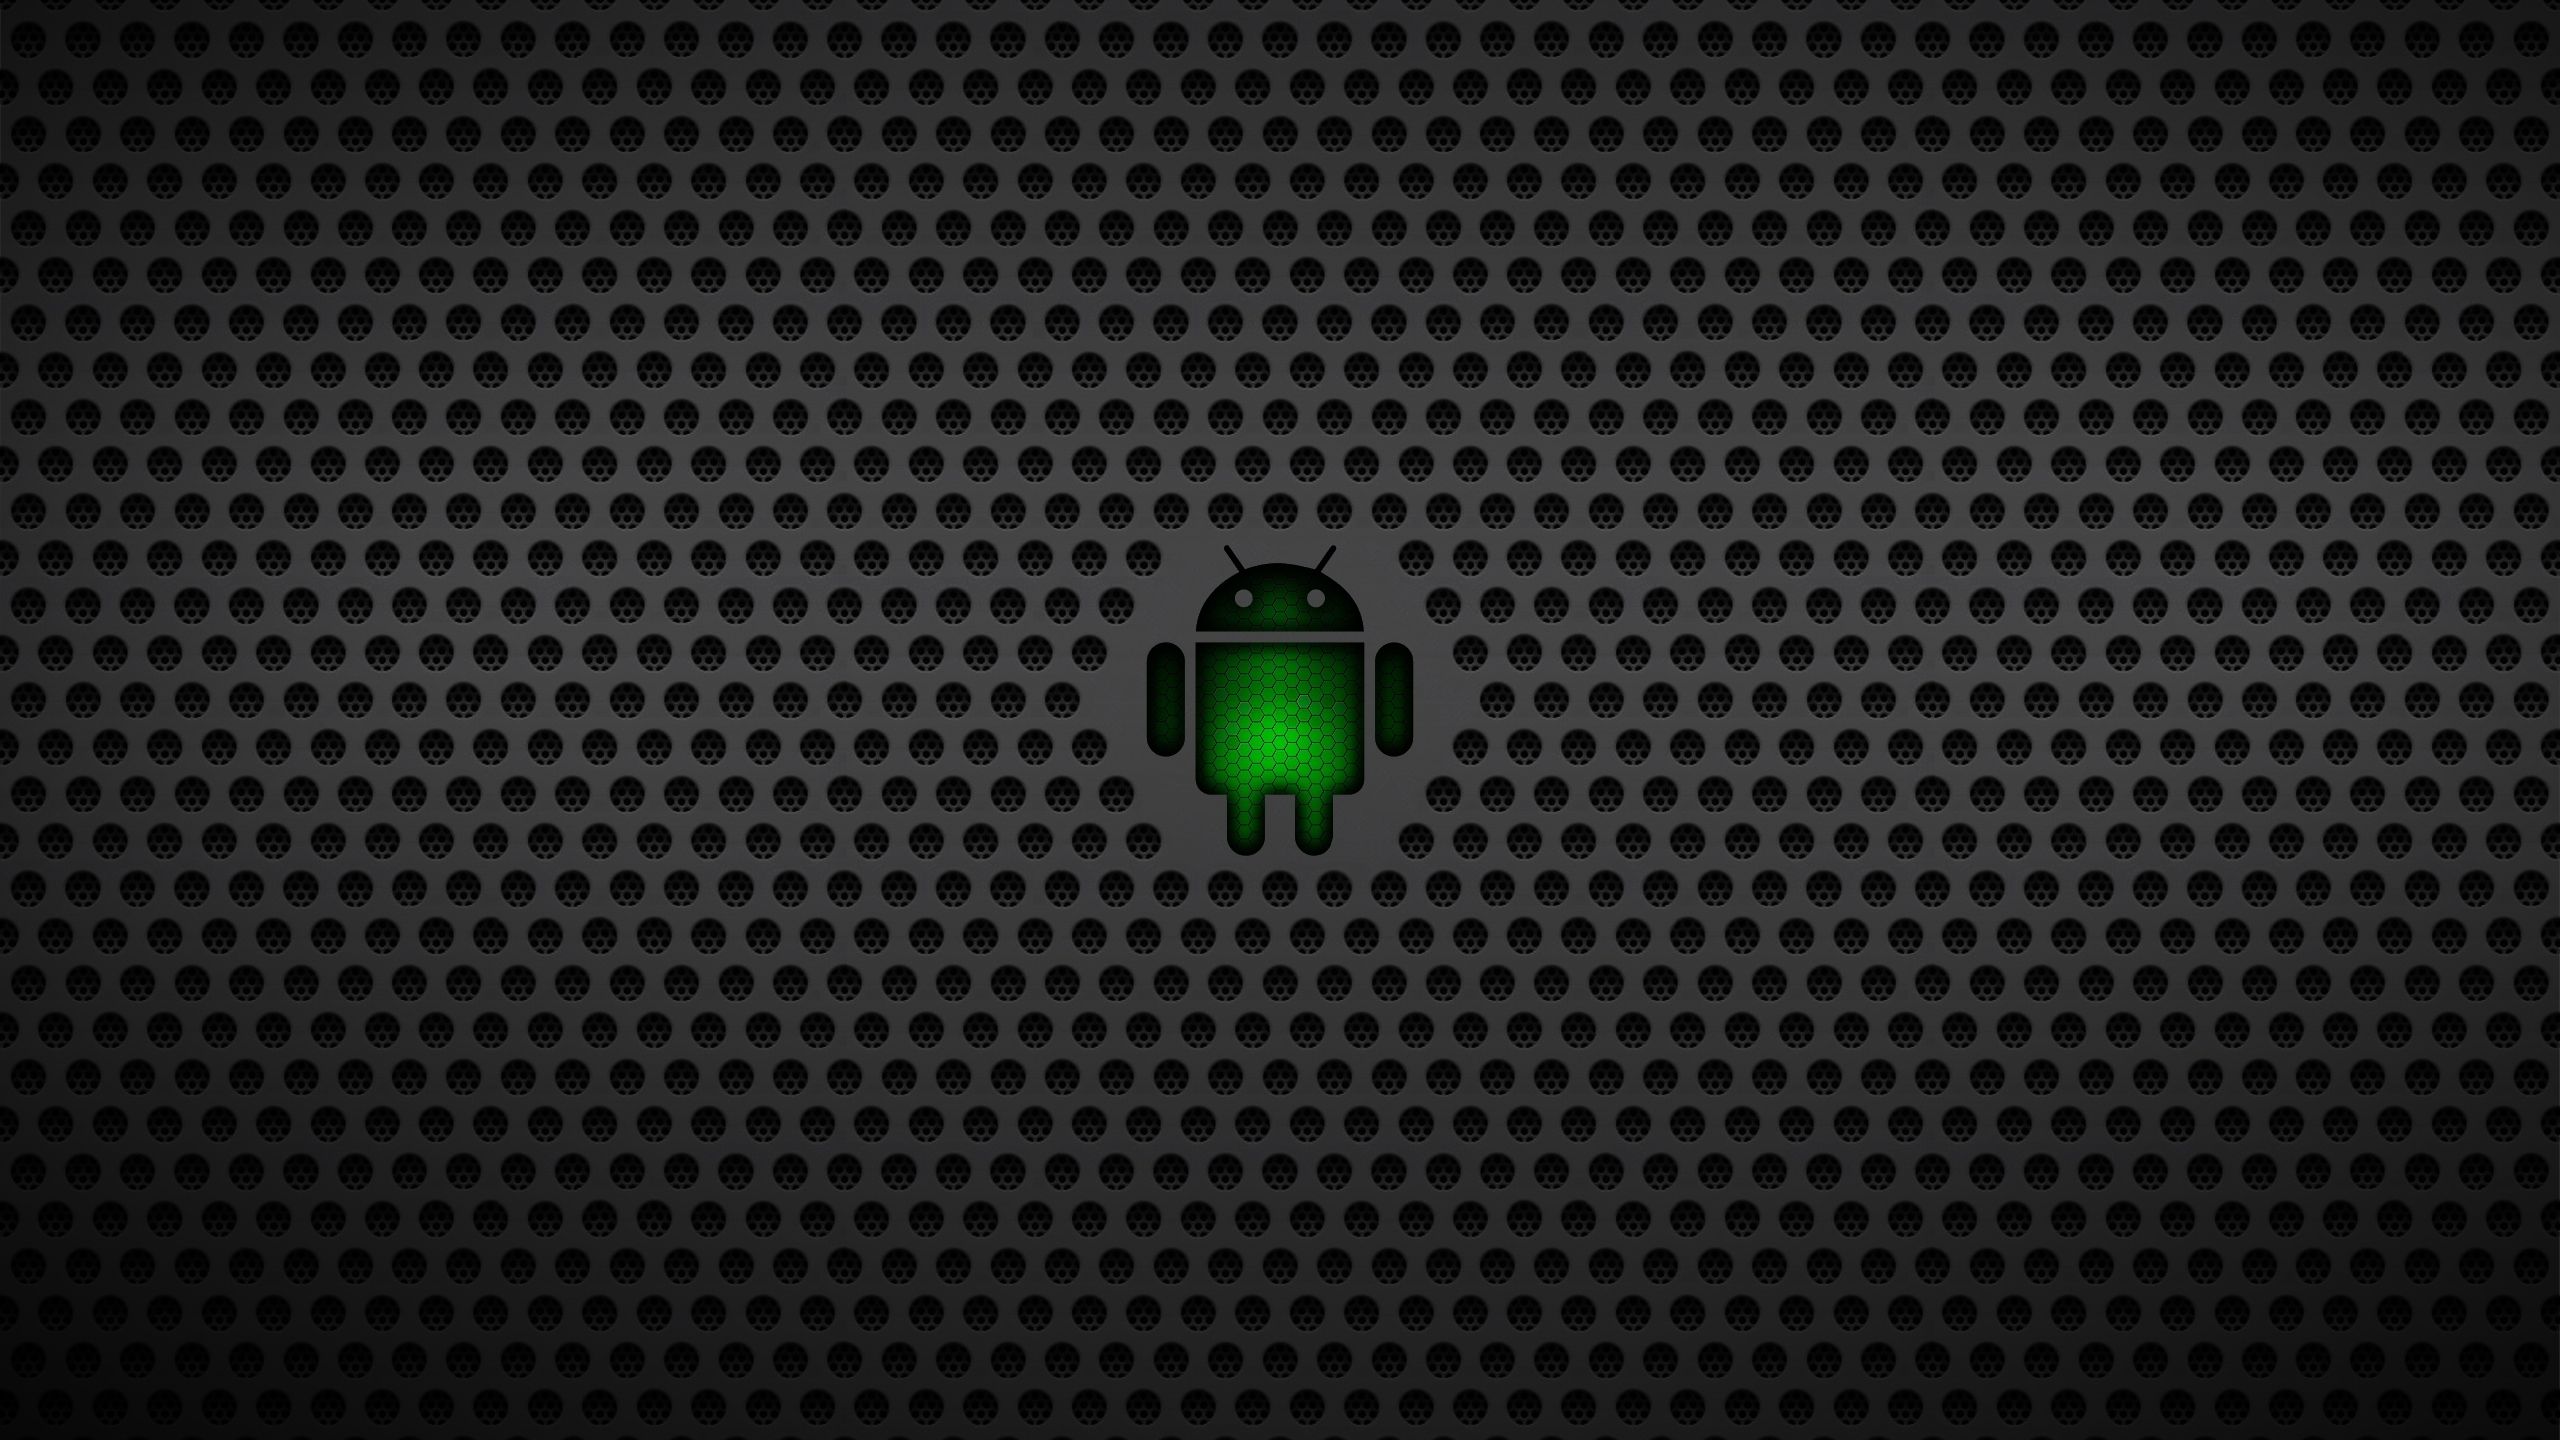 2560x1440 Android Operating System Os 1440p Resolution Wallpaper Hd Hi Tech 4k Wallpapers Images Photos And Background Wallpapers Den